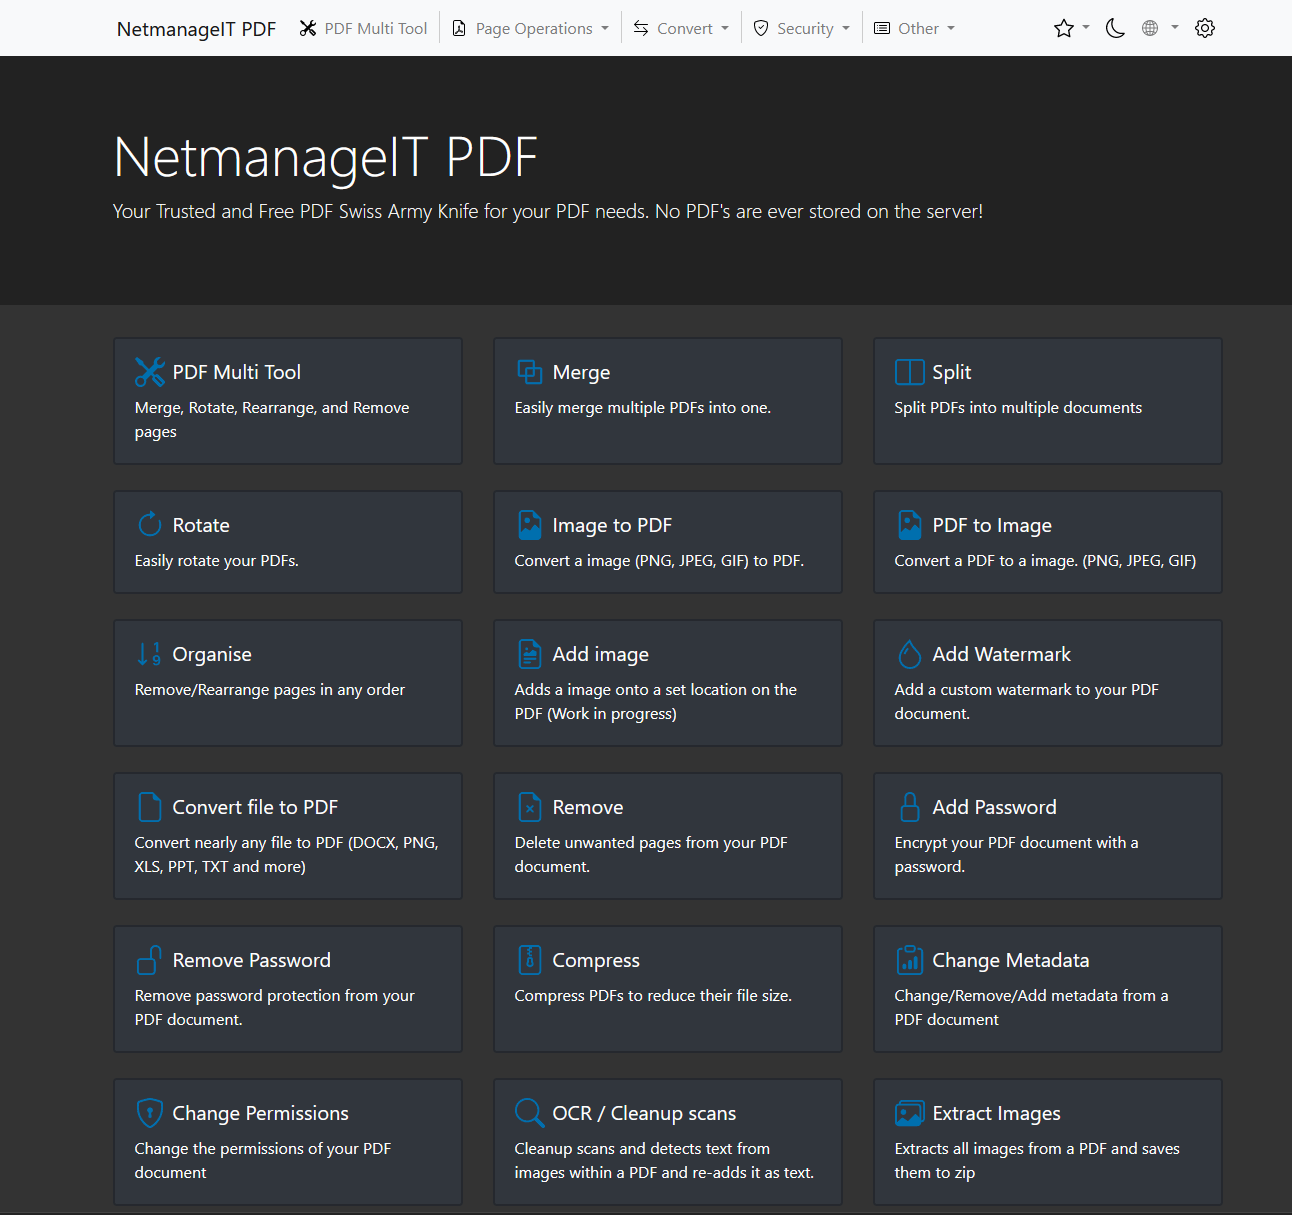 Free PDF Tools by NetmanageIT